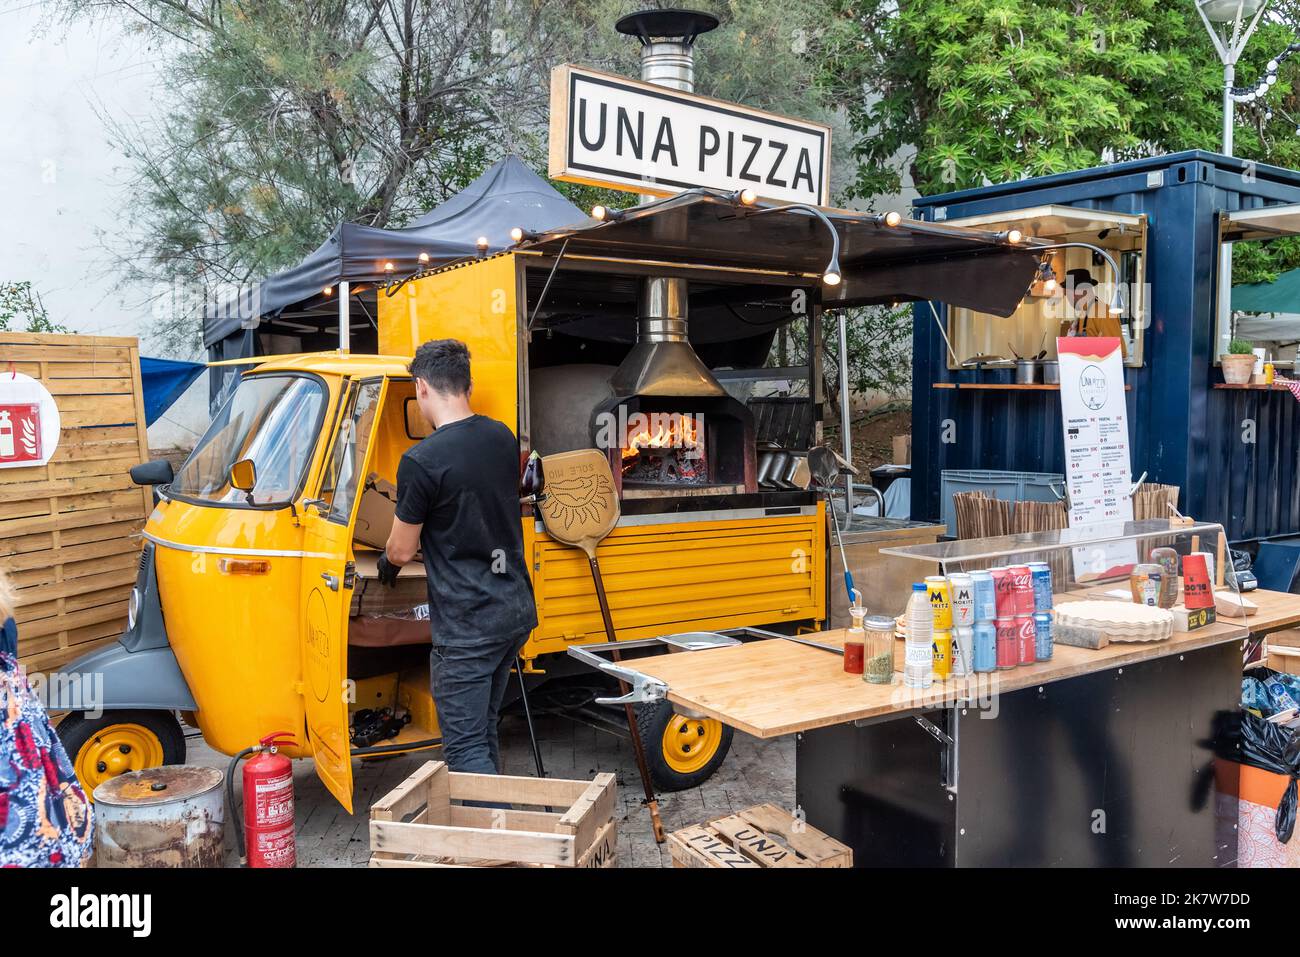 SITGES, BARCELONA, SPAIN - OCTOBER 08, 2022: light commercial vehicle with three wheels enabled for the preparation of fast food with a wood-fired ove Stock Photo